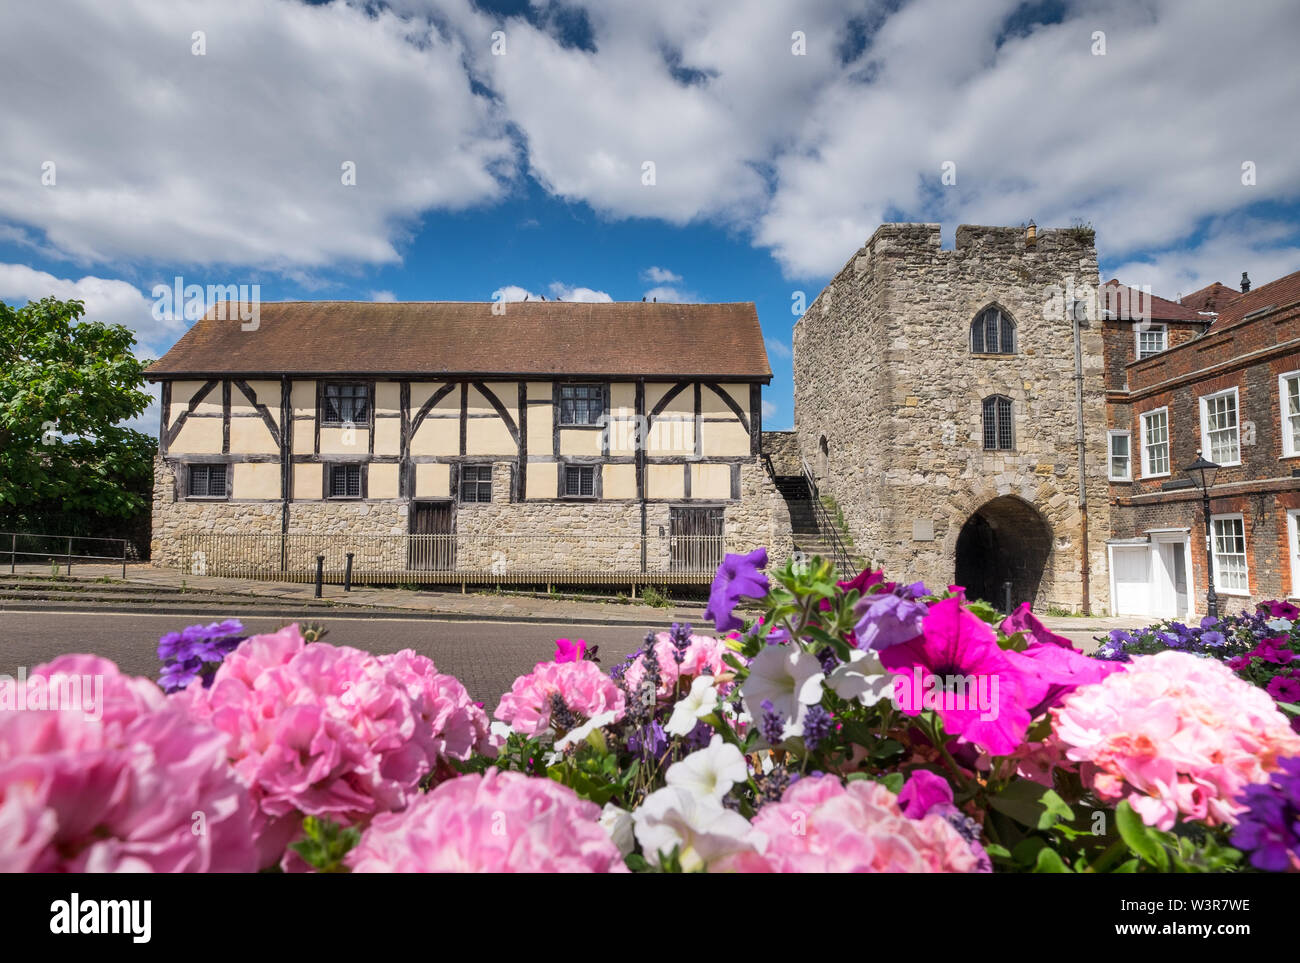 Westgate Hall and Westgate in the old medieval walls of Southampton, Hampshire, UK Stock Photo